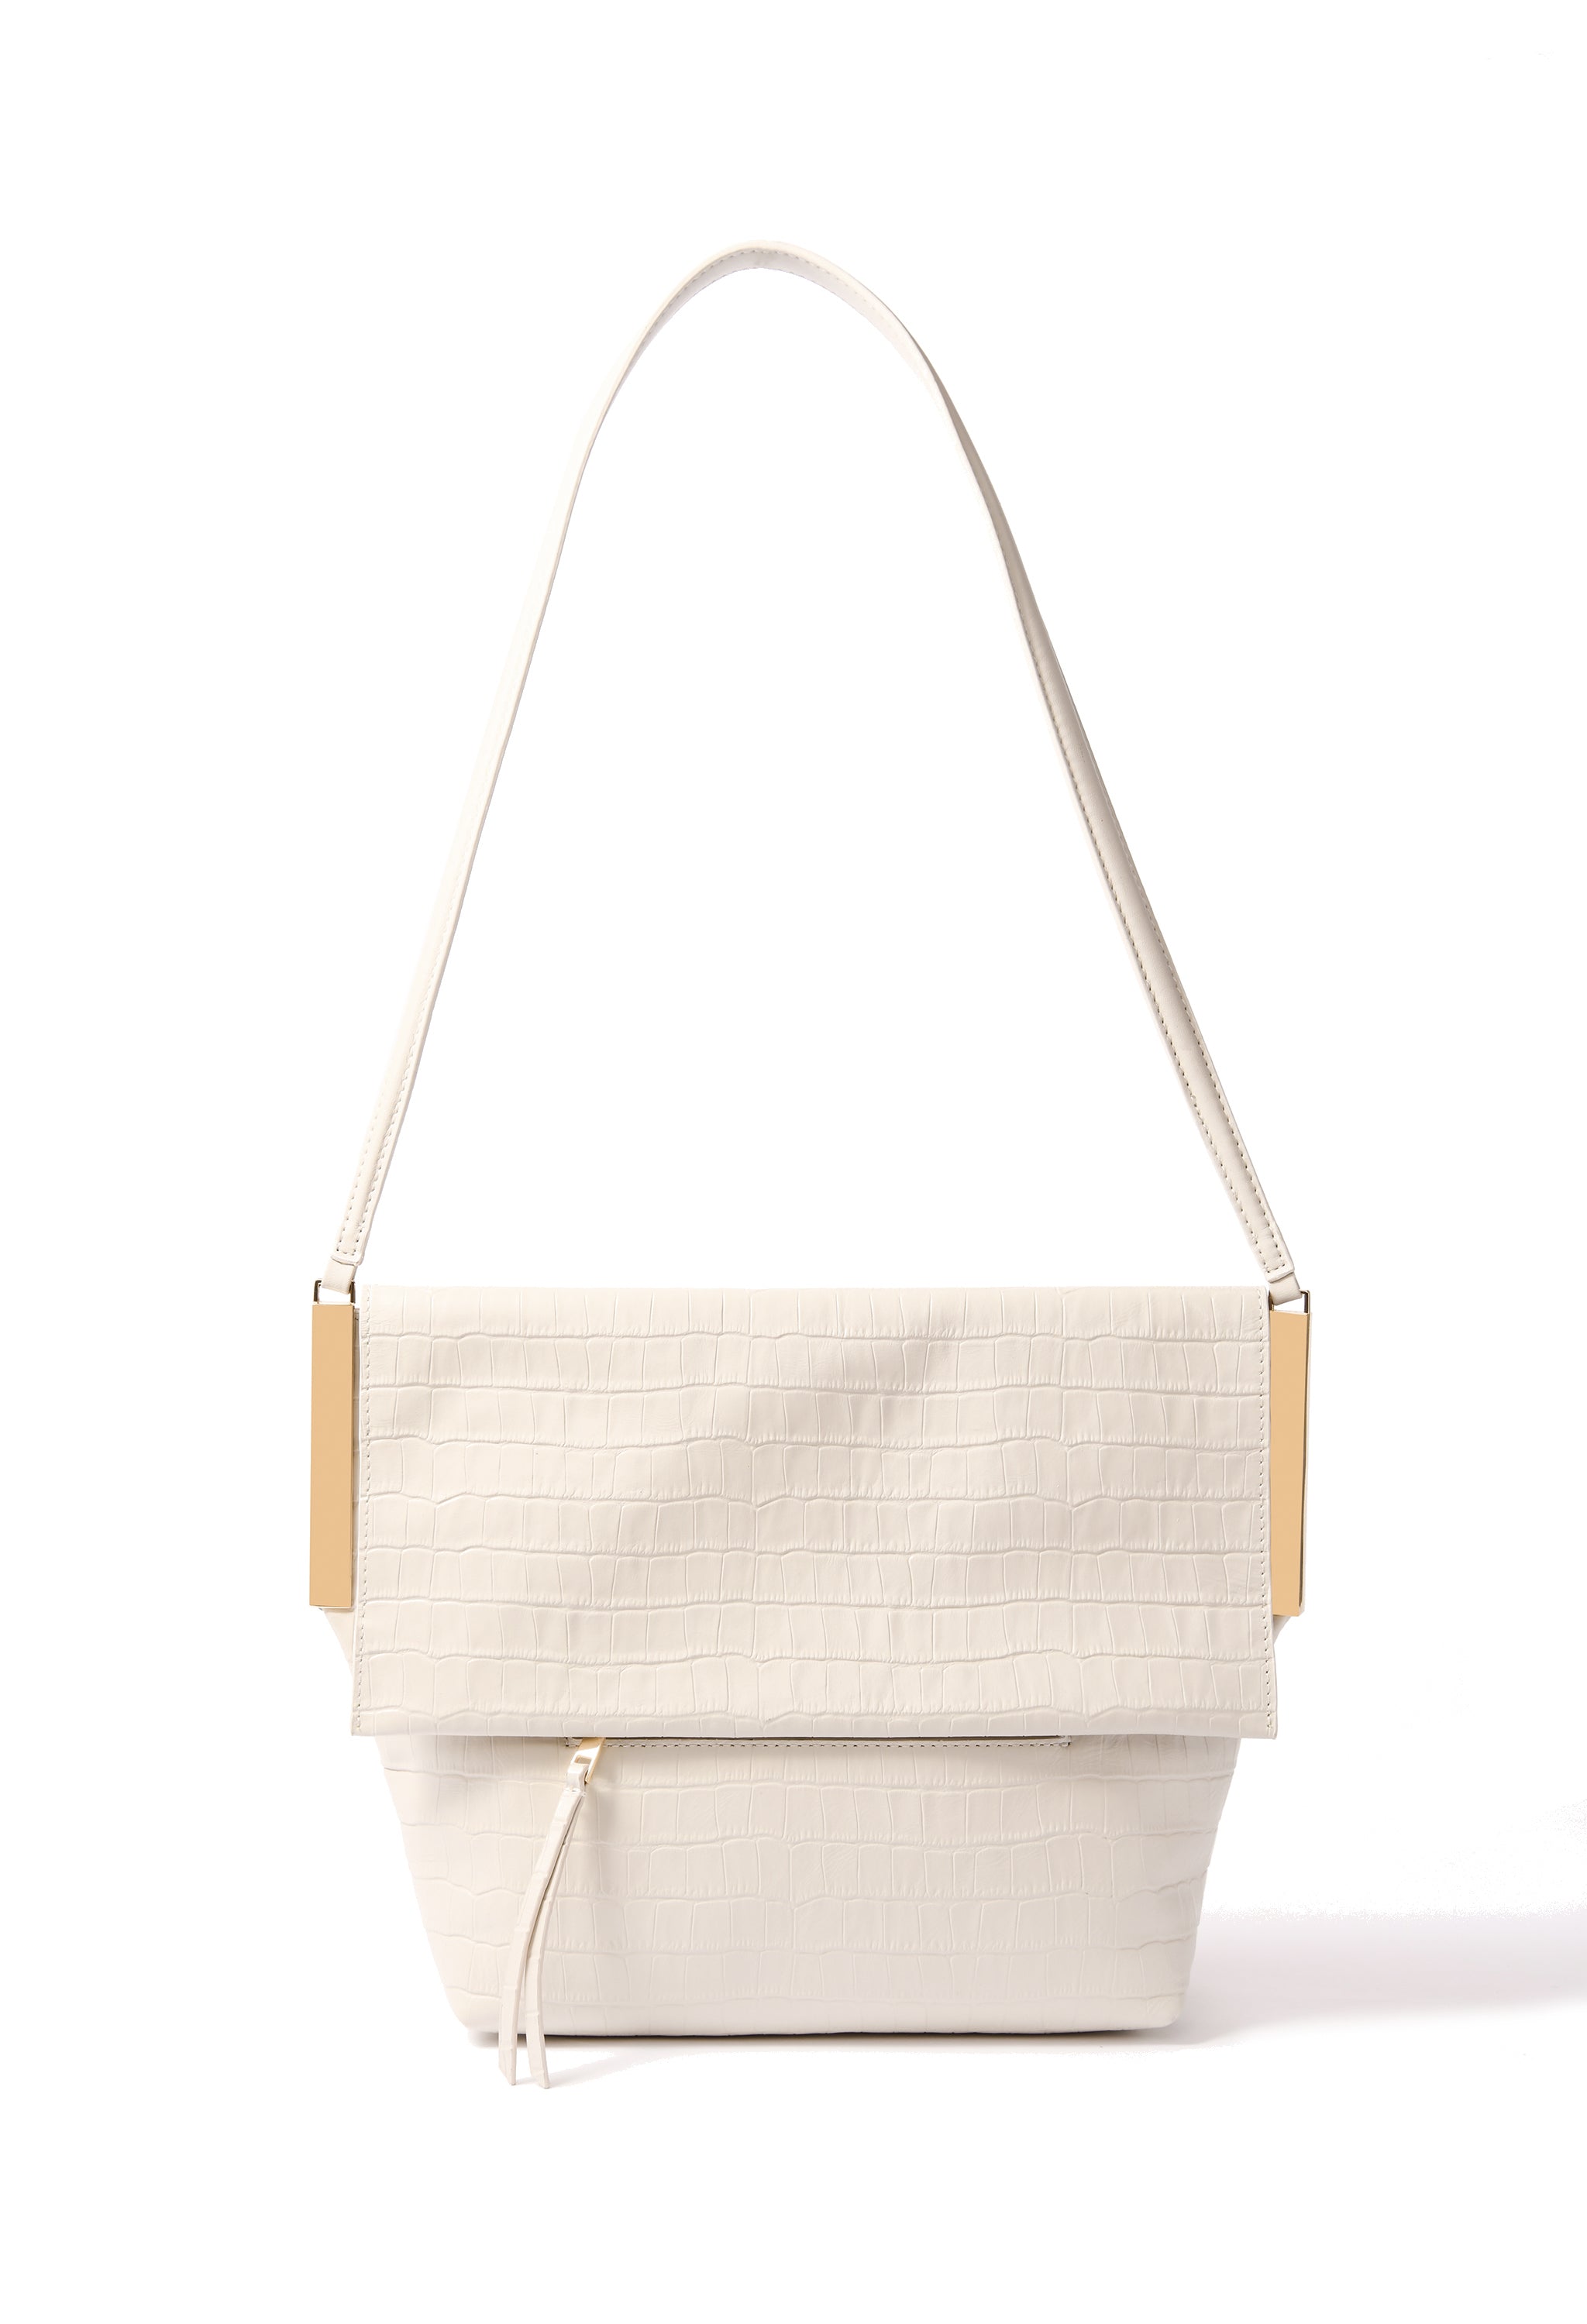 Giselle Bag in croco embossed leather, White